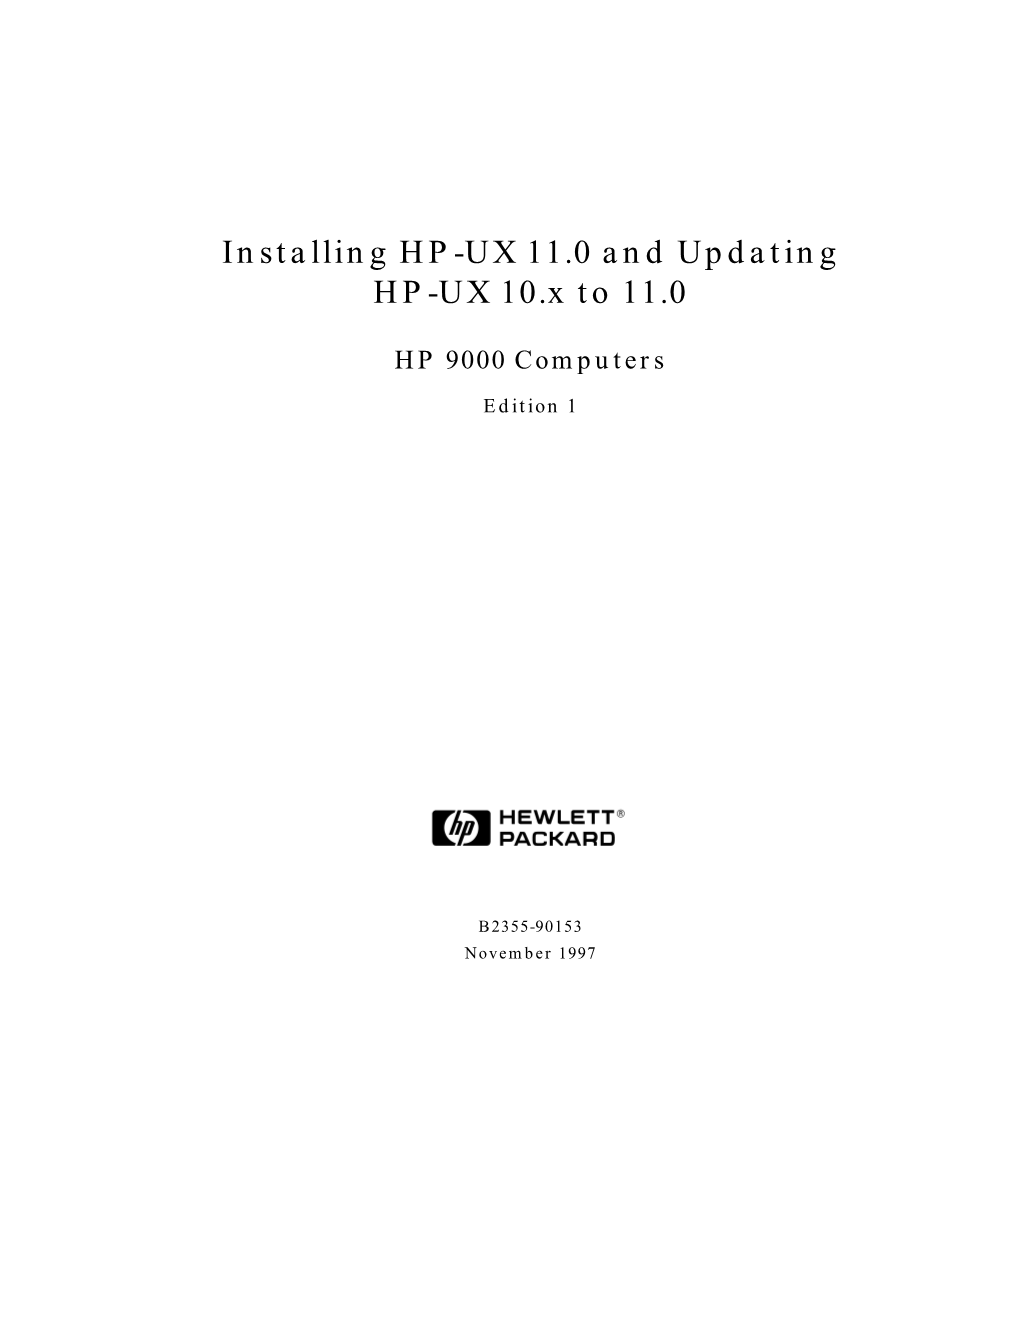 Installing HP-UX 11.0 and Updating HP-UX 10.X to 11.0